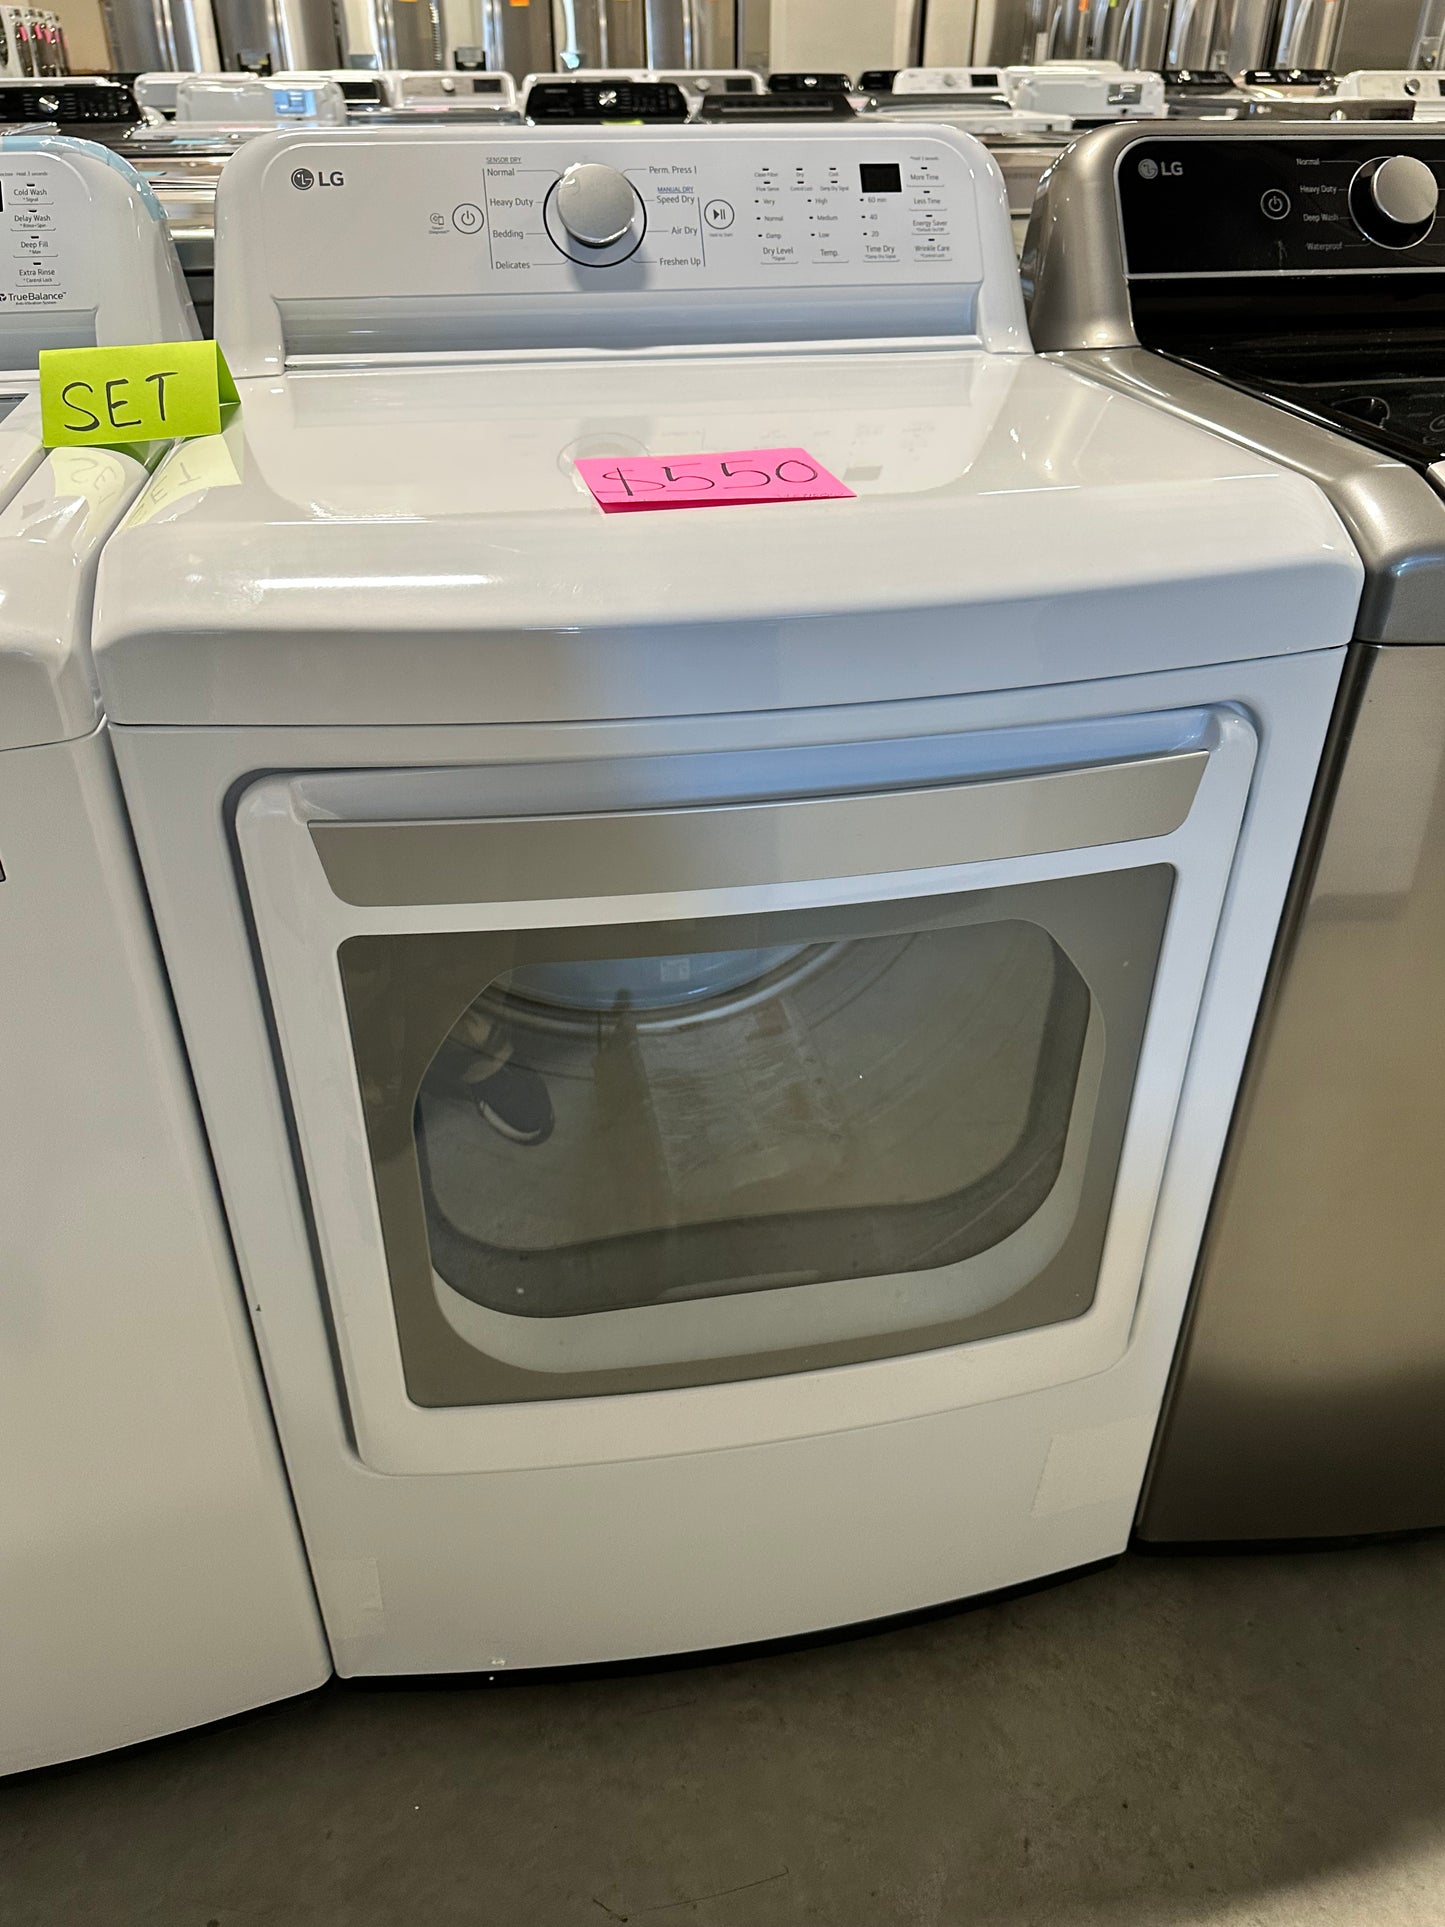 NEW WHITE ELECTRIC DRYER - 7.3 CU FT - DRY12065